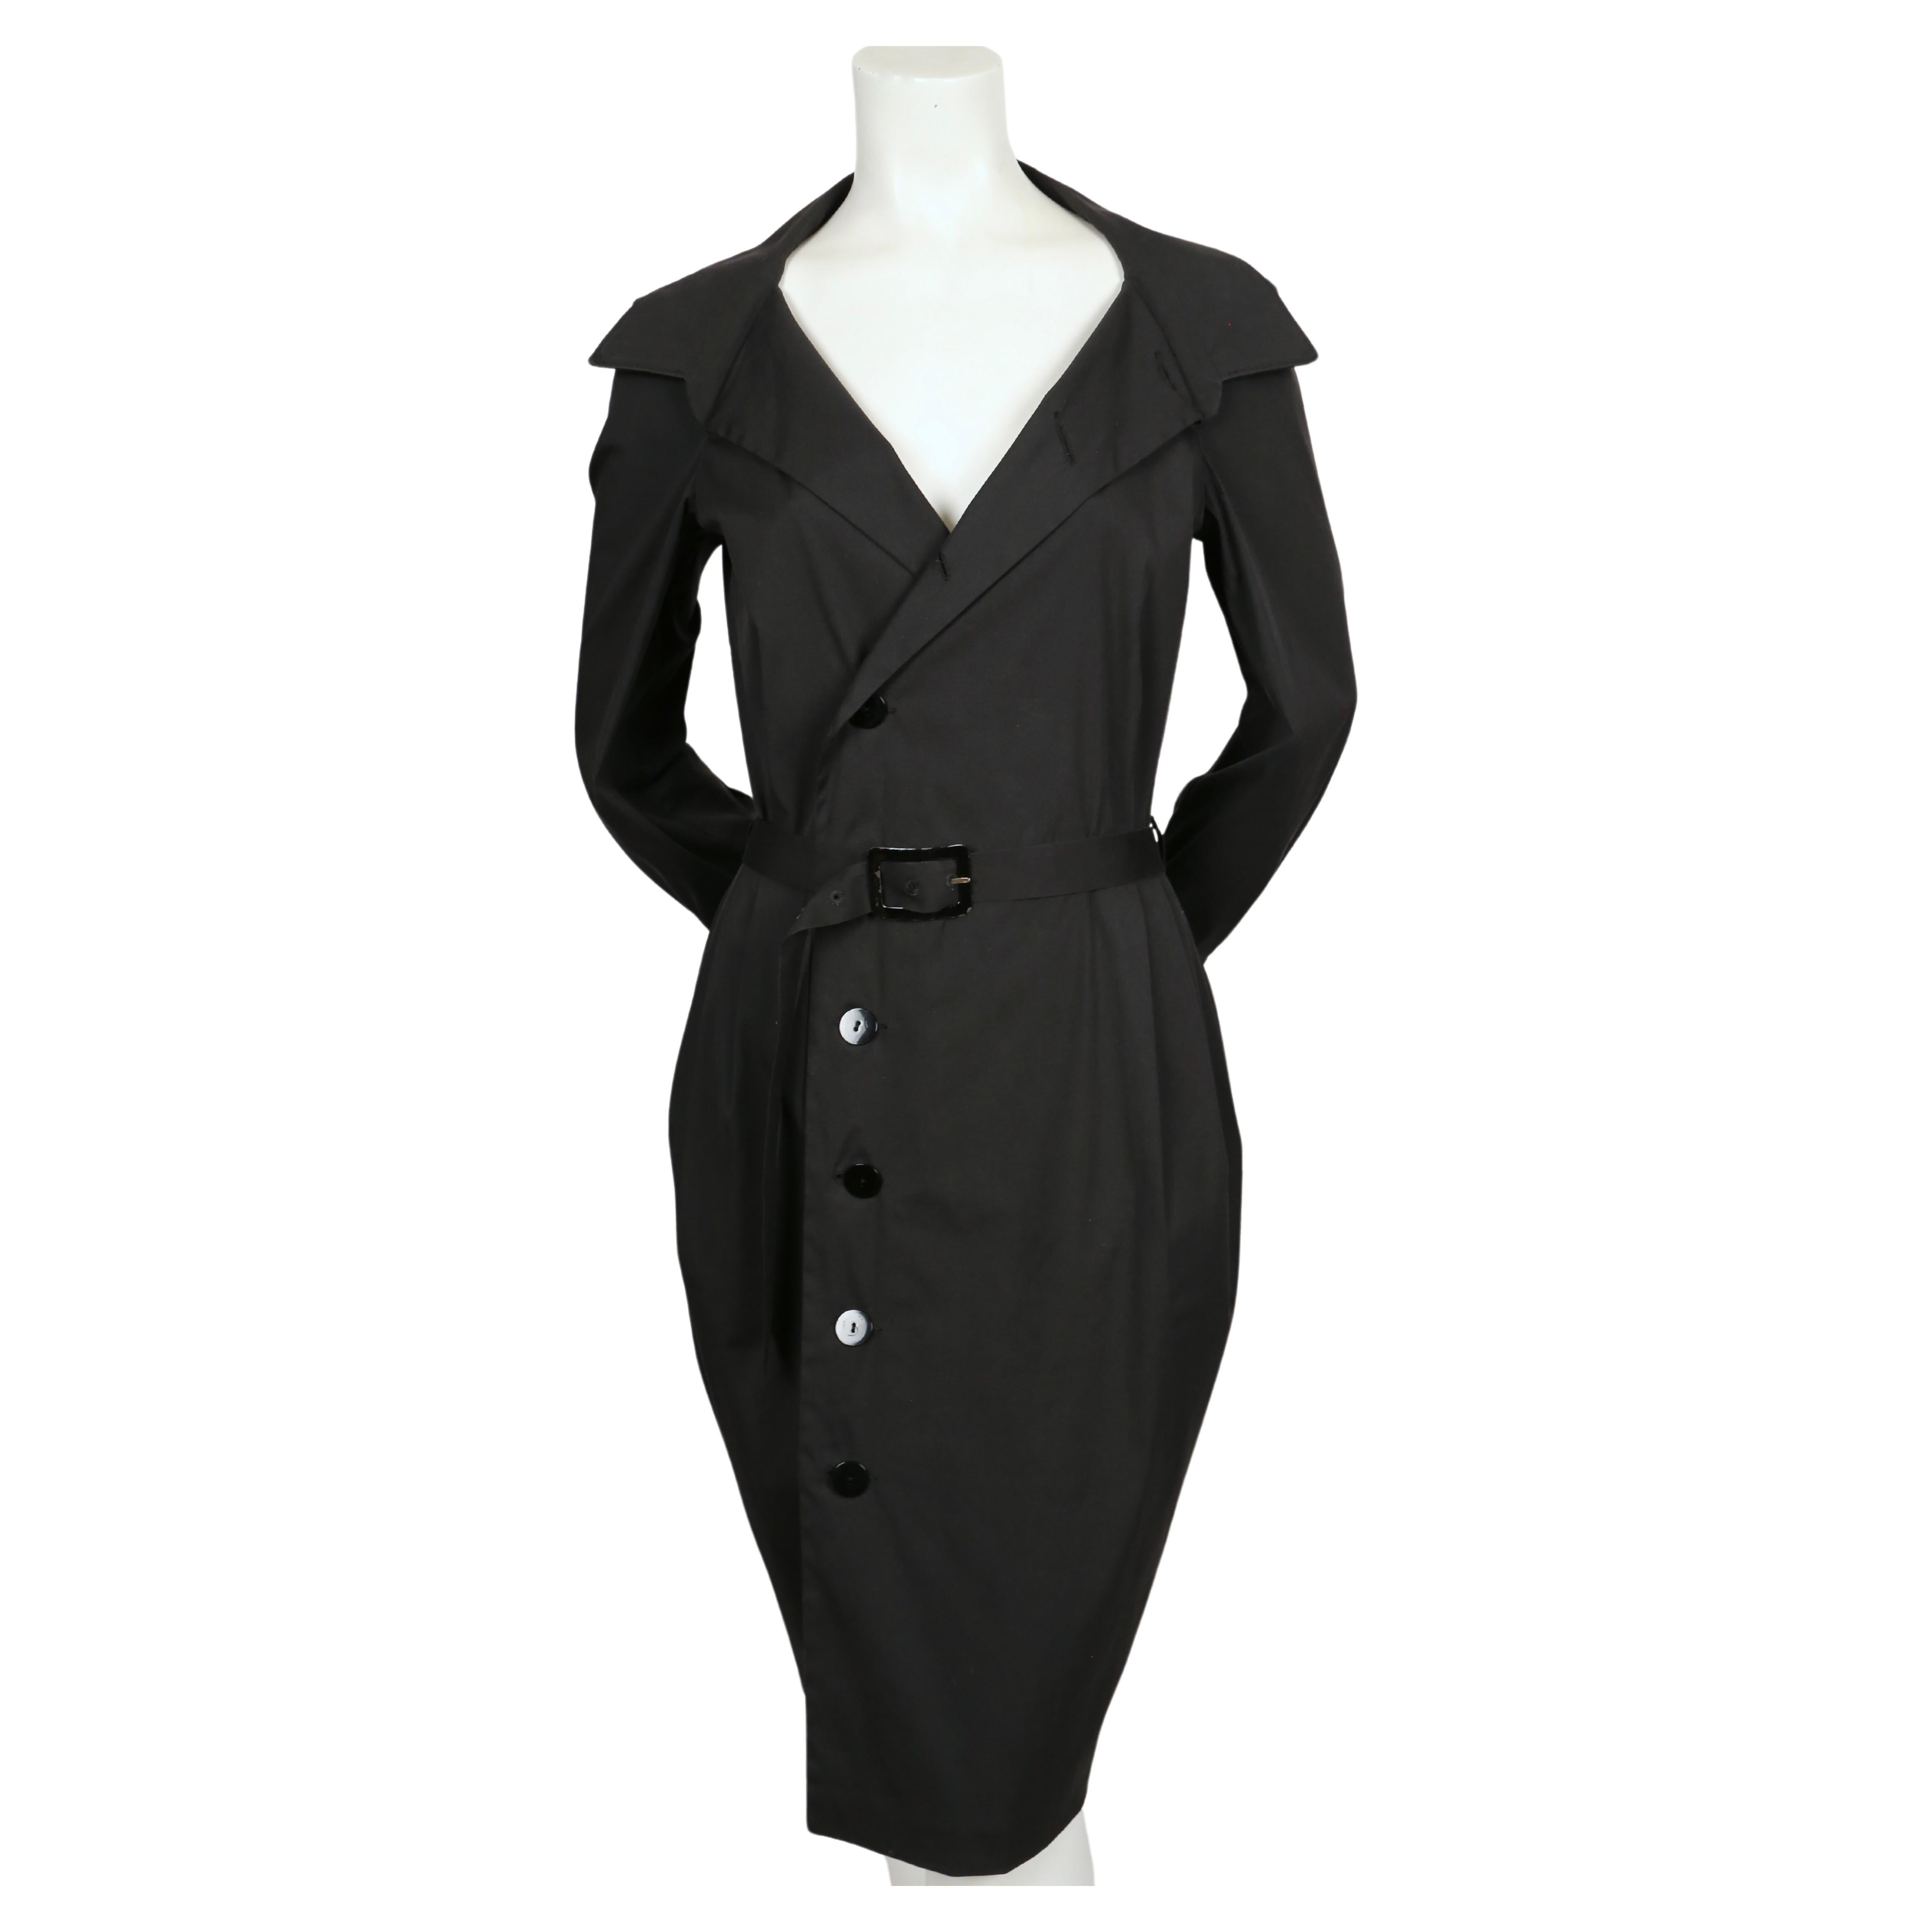 Black wrap style dress with enameled belt designed by Jean Paul Gaultier dating to the late 1990's. Labeled a French size 40 (Italian 44). Approximate measurements: 17